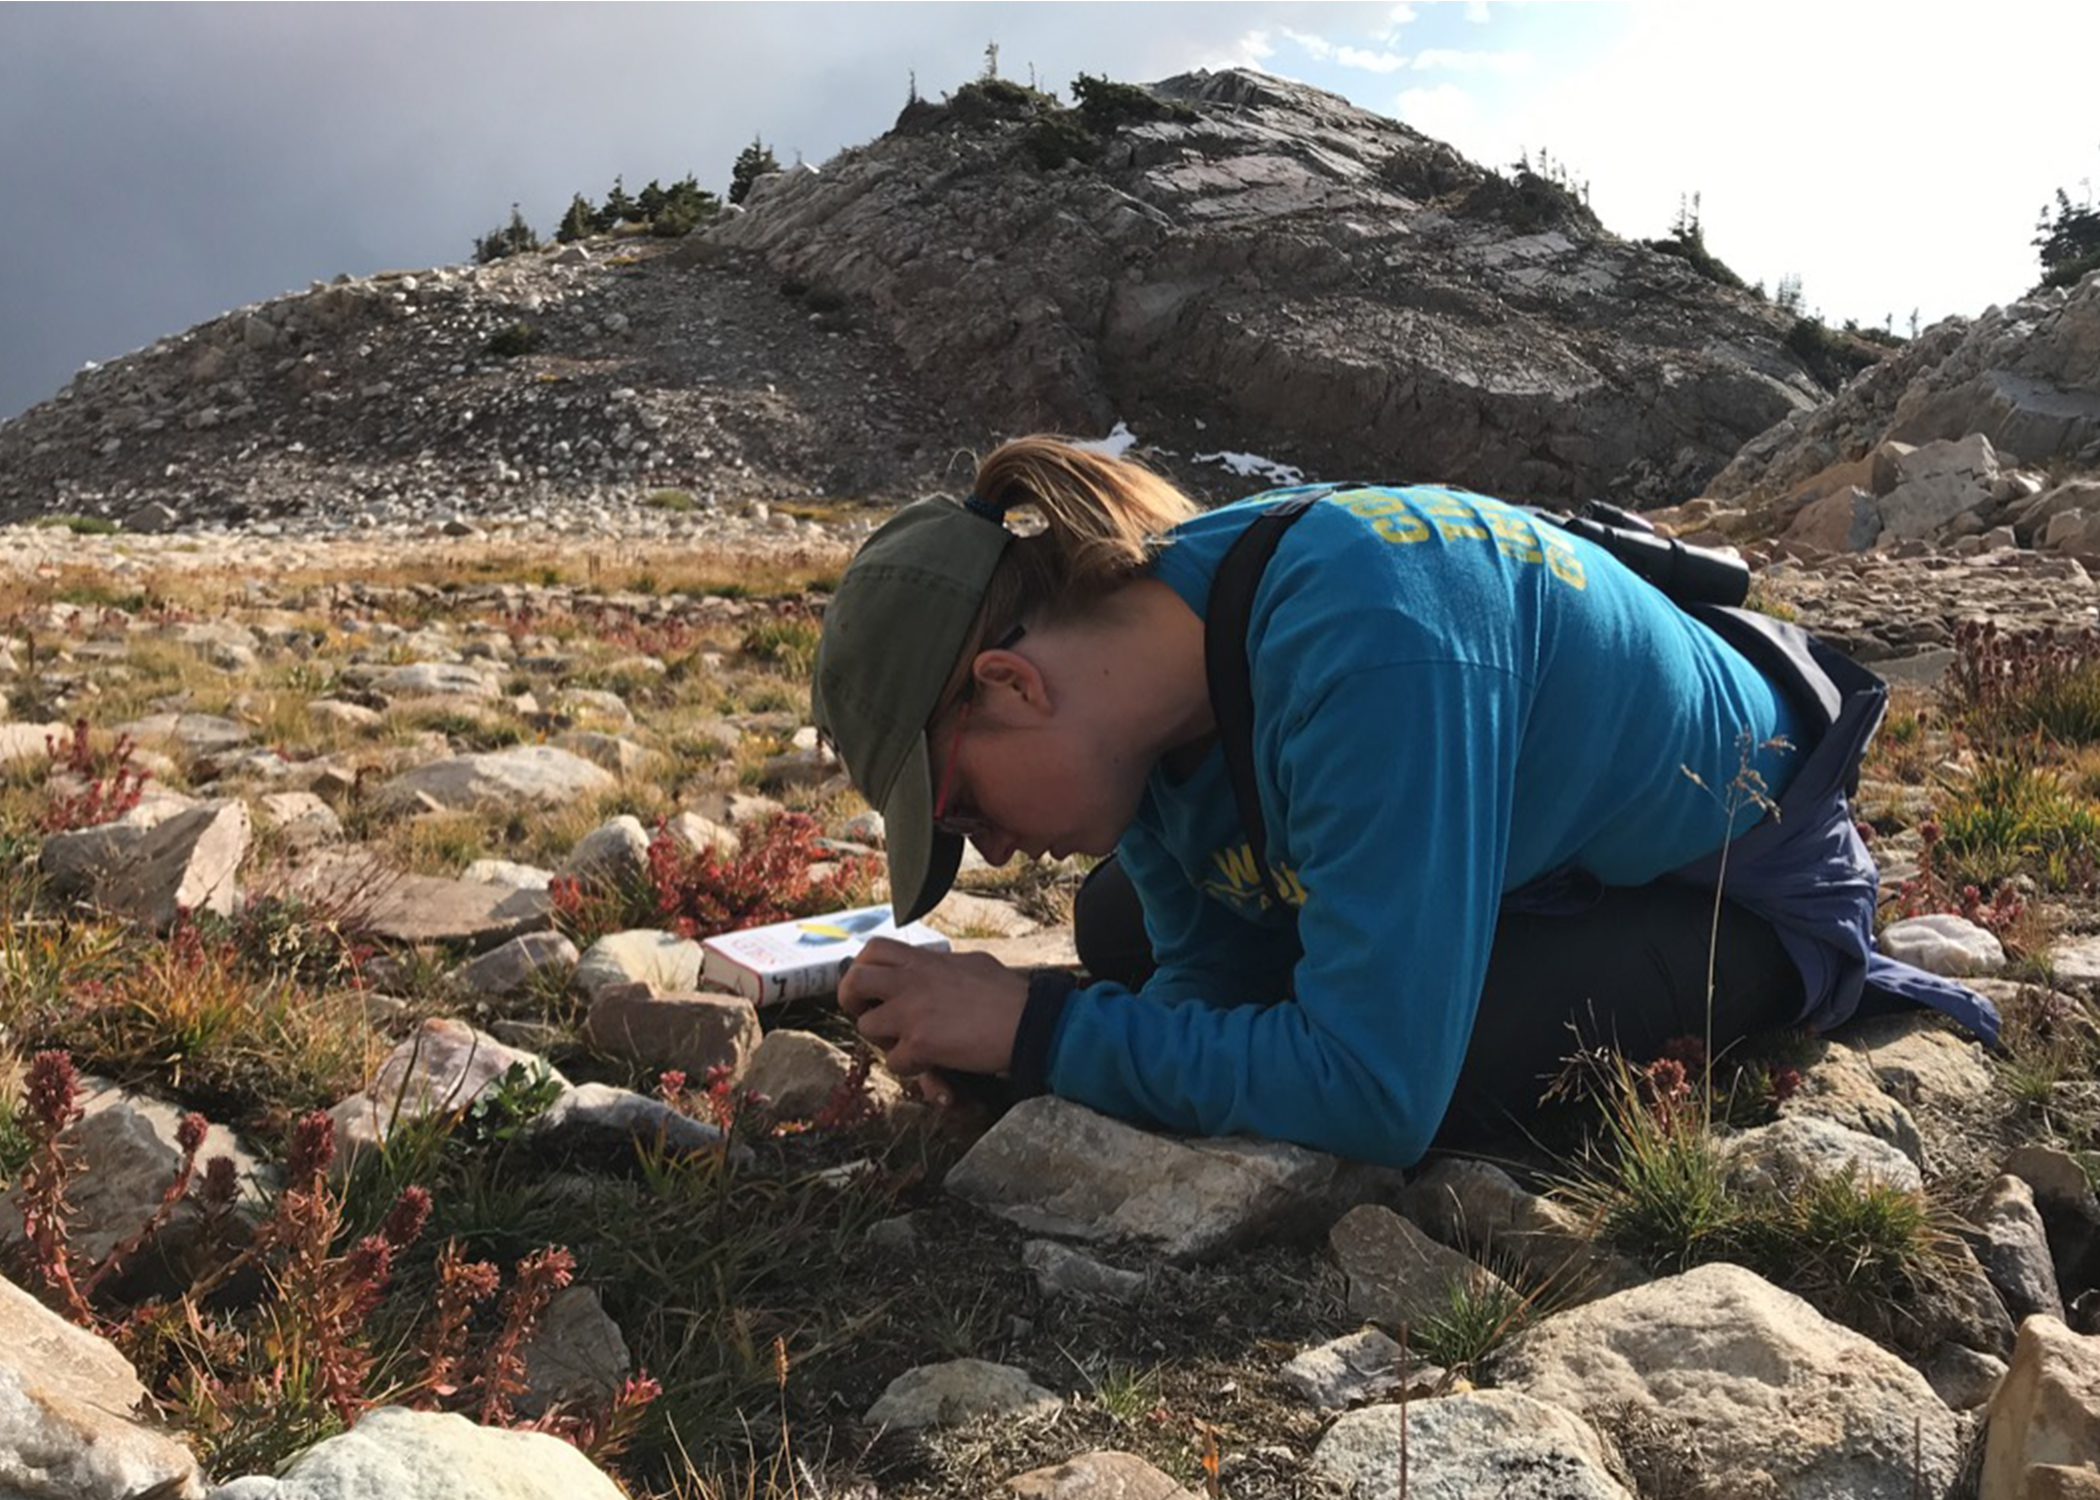 "Community scientist uses the iNaturalist app on her phone to help identify flowers while on a hike. The photographs will be recorded on iNaturalist and contribute to the understanding of local flora."